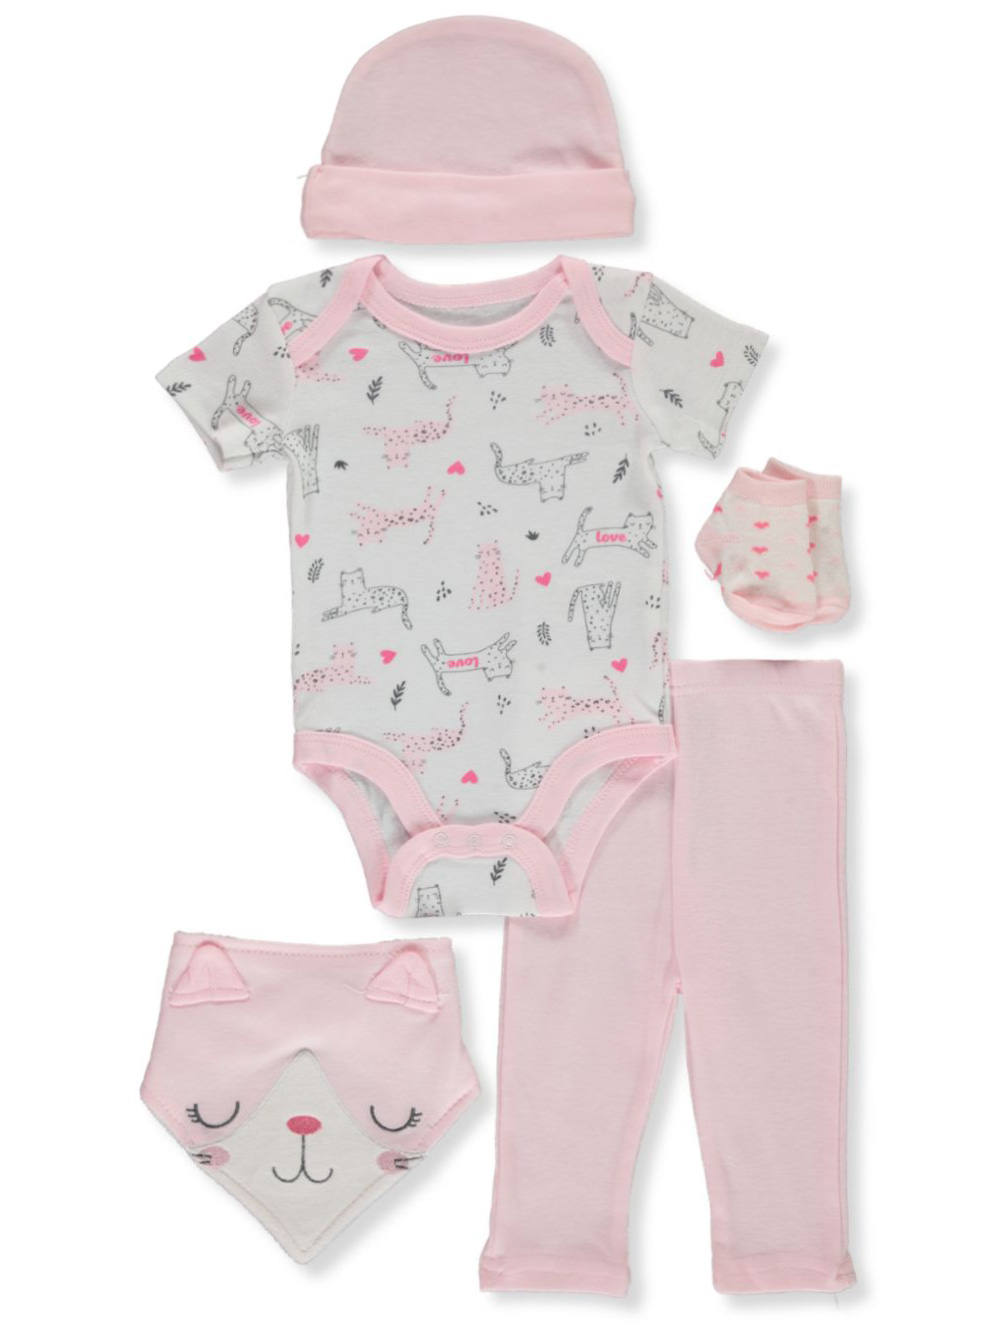 Girls Clothing and Layette